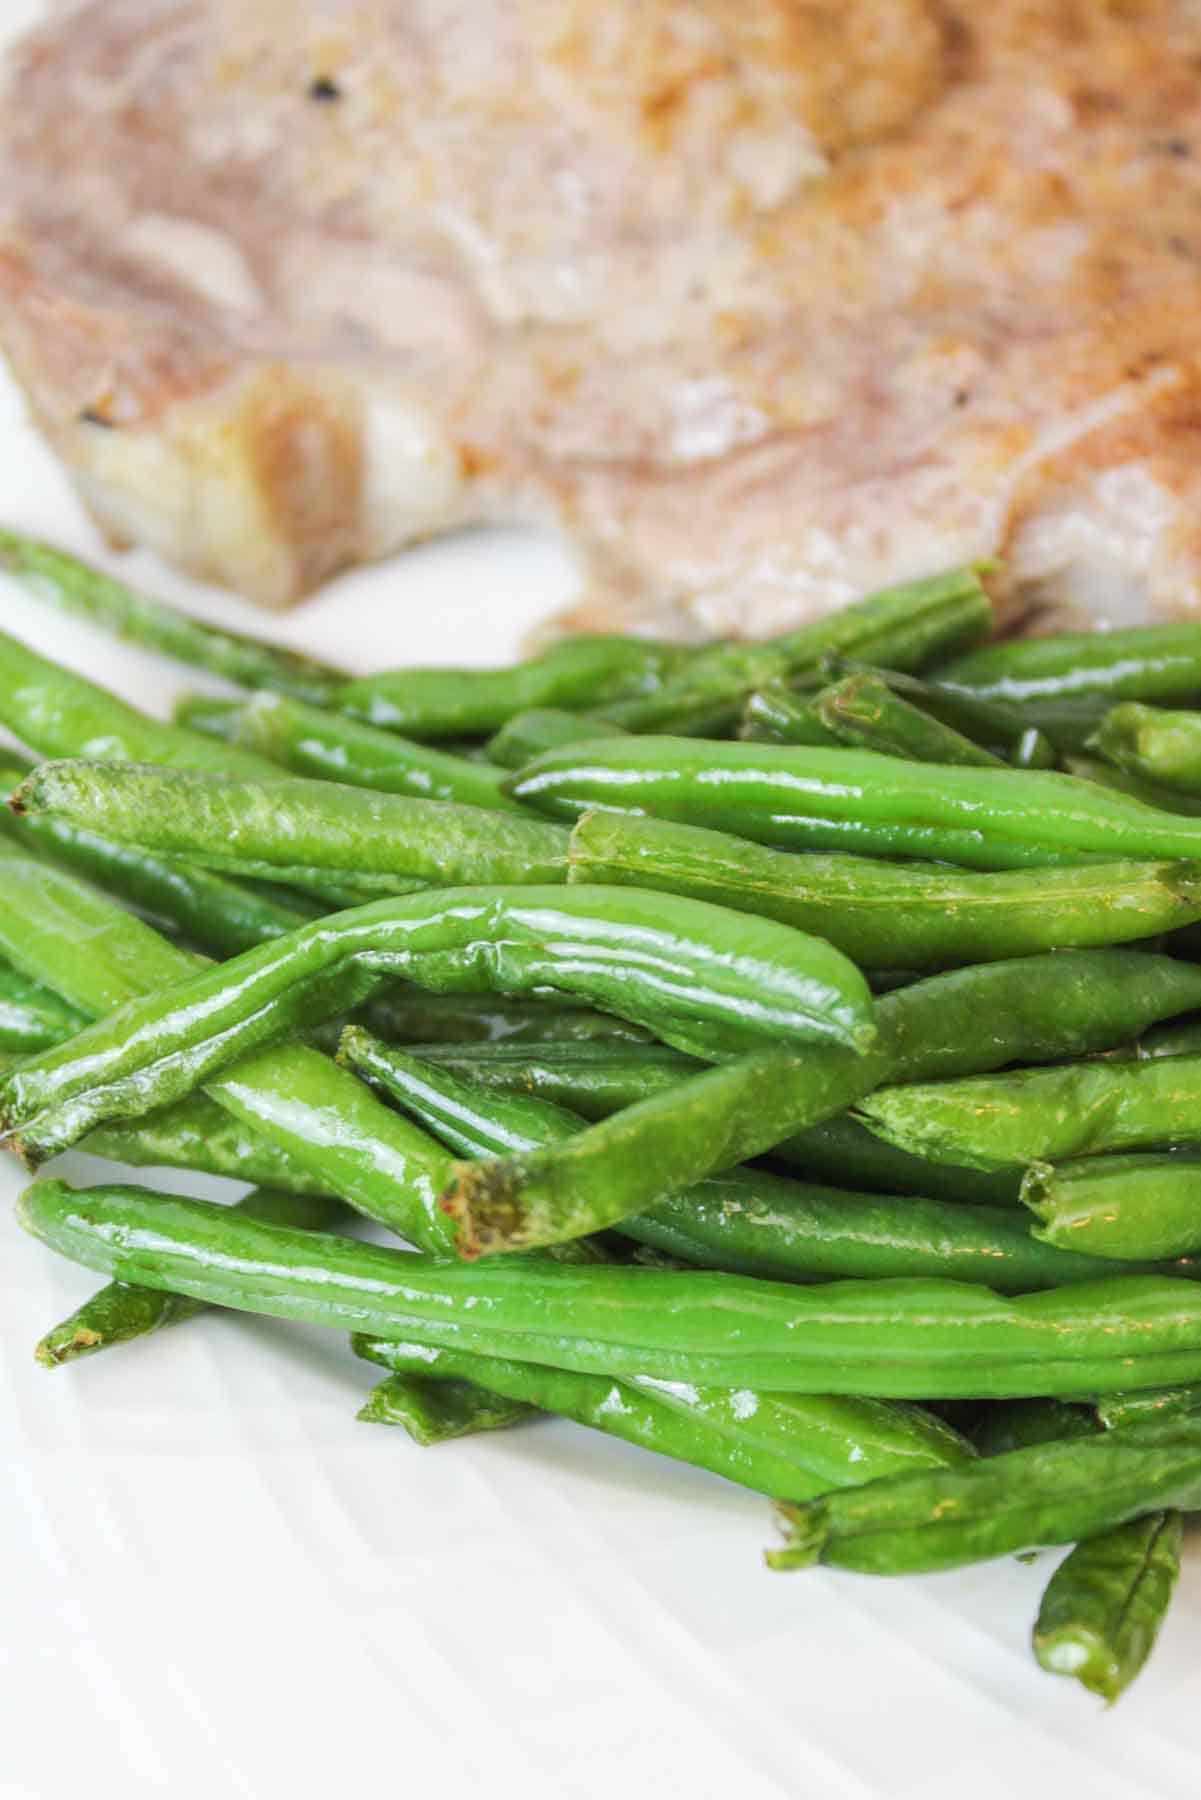 upclose view of cooked green beans with a pork chop in the background